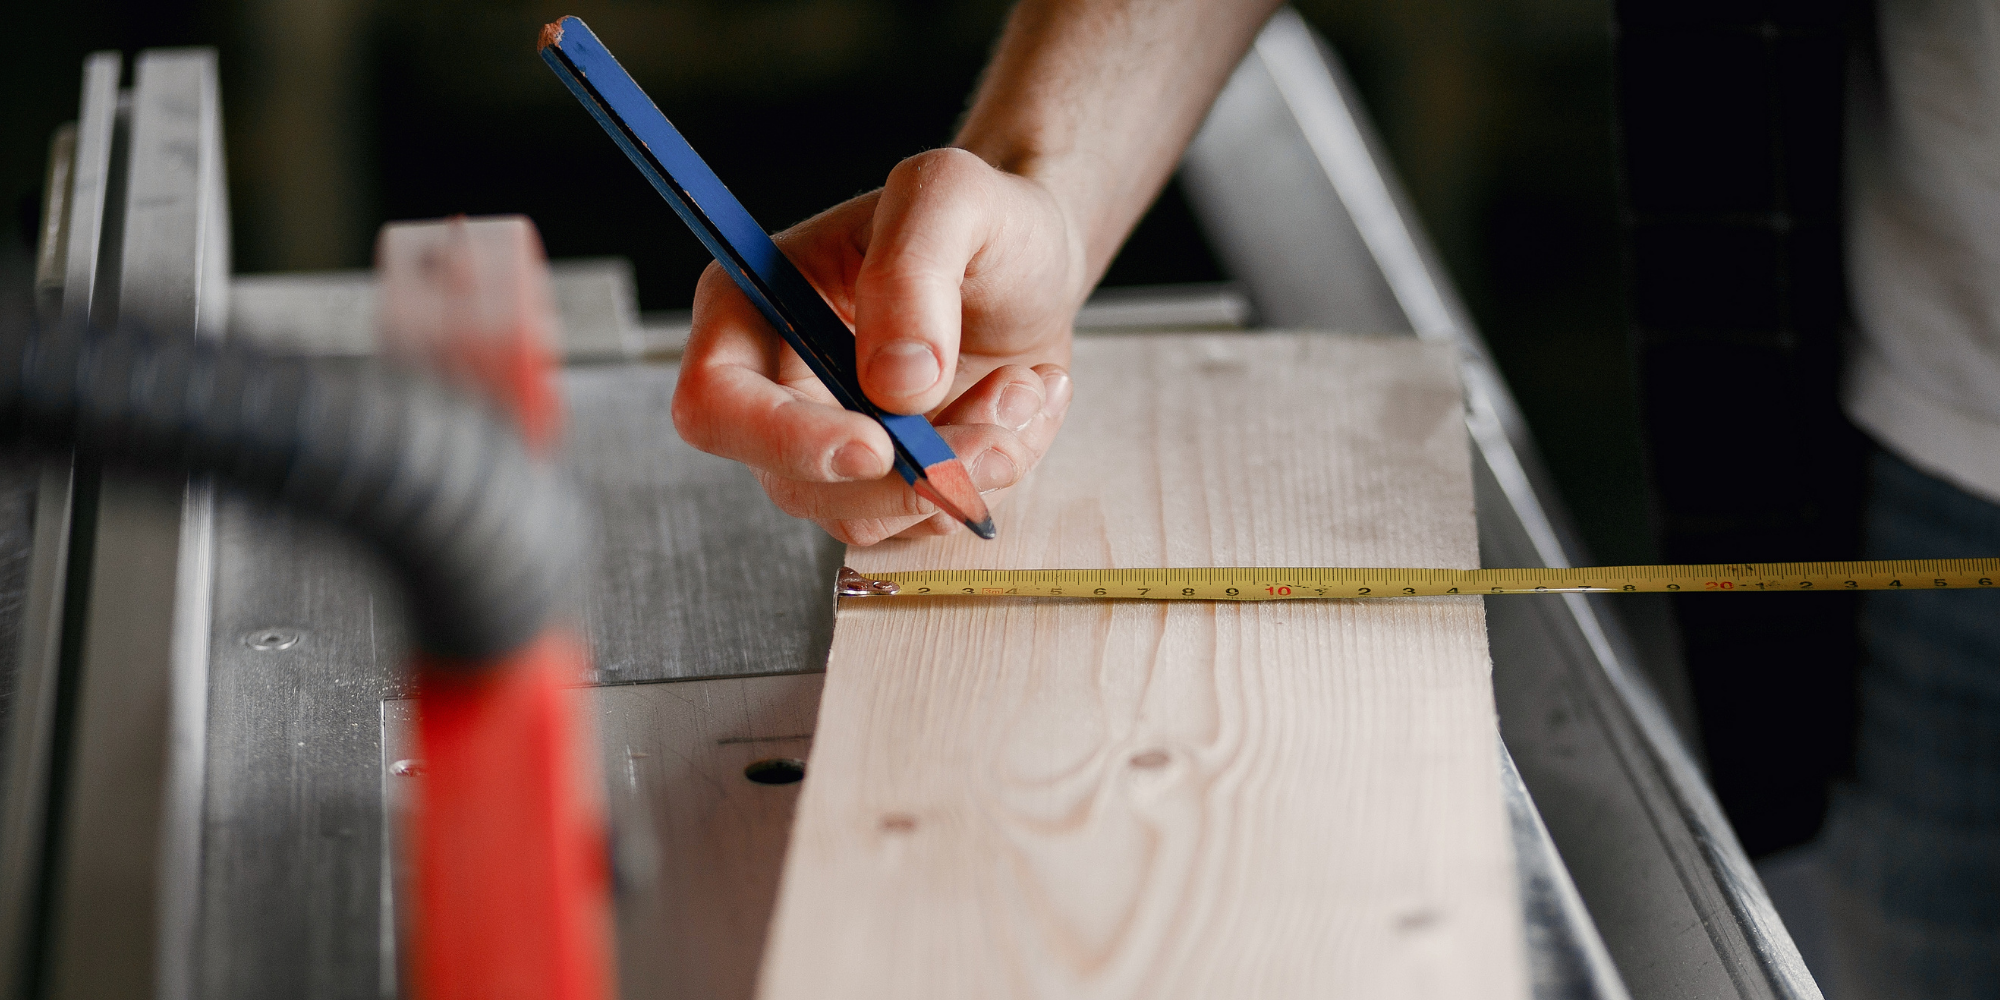 Woodworking Tools - Marking & Measuring